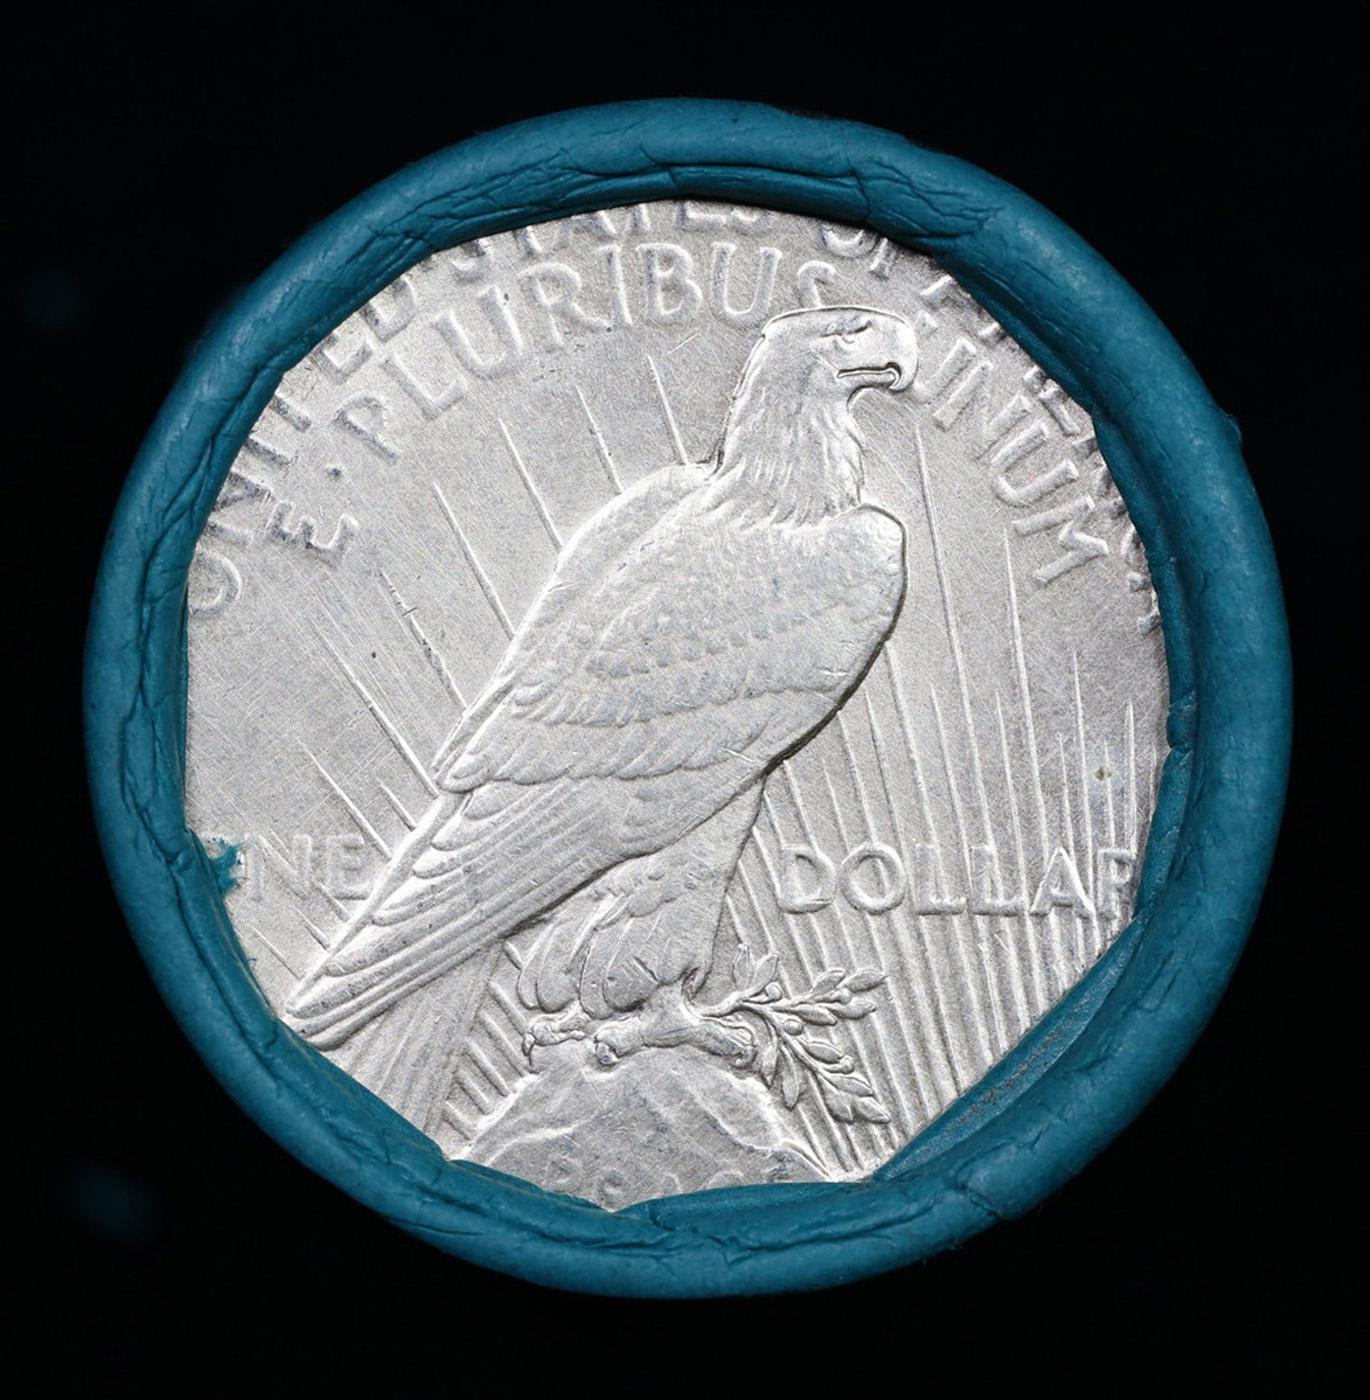 ***Auction Highlight*** Bank Of America 1886 & 'P' Ends Mixed Morgan/Peace Silver dollar roll, 20 co